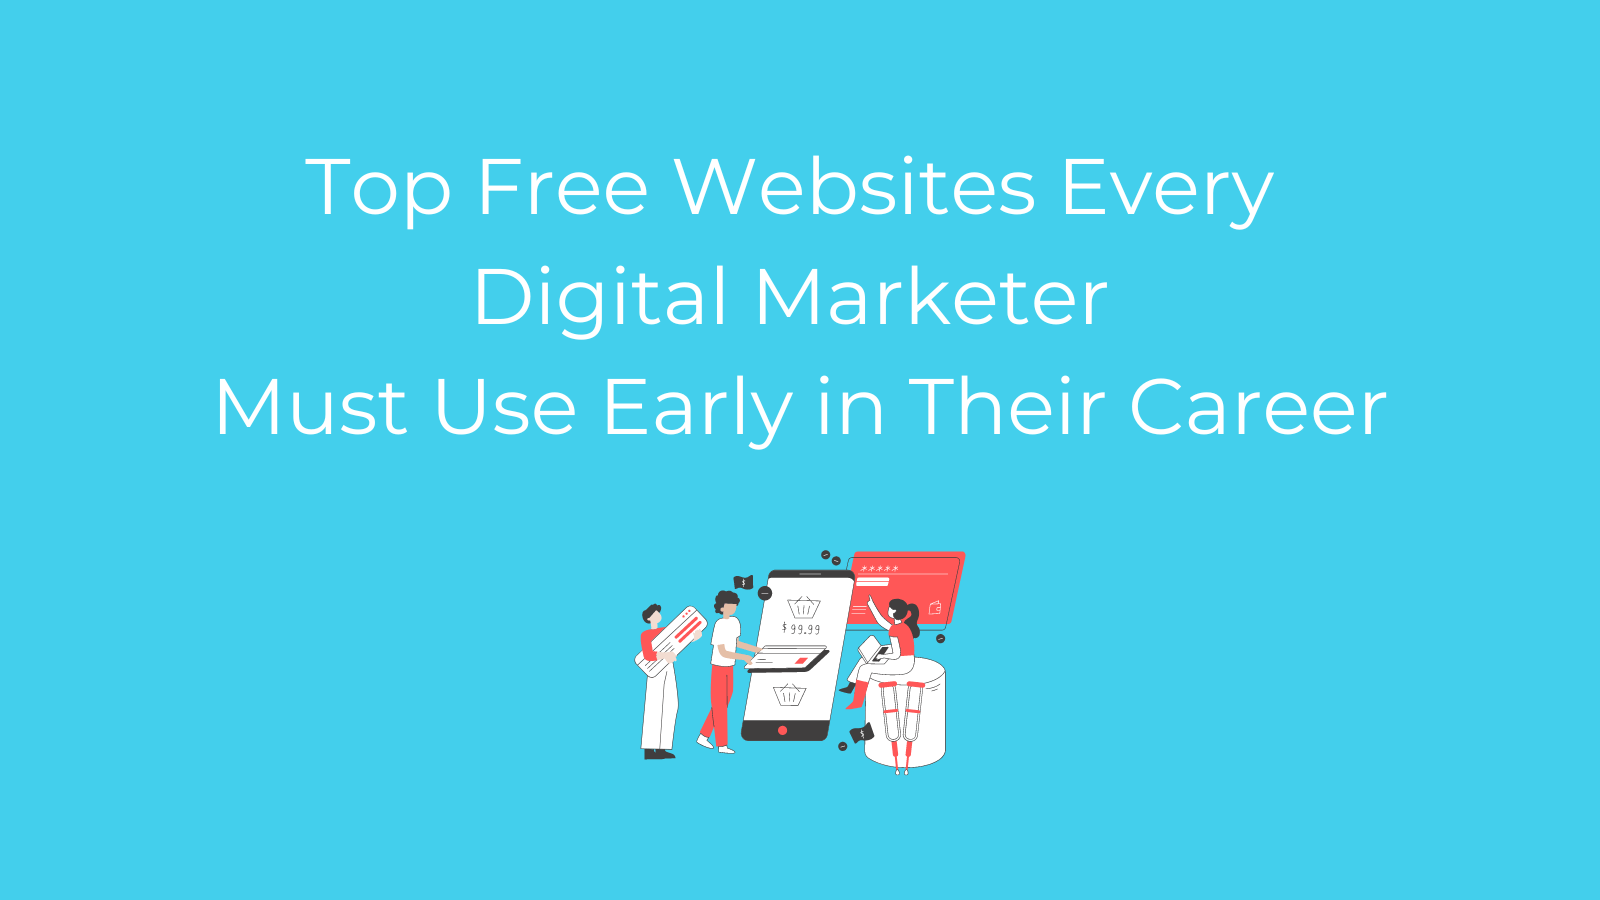 Top Free Websites Every Digital Marketer Must Use Early in Their Career